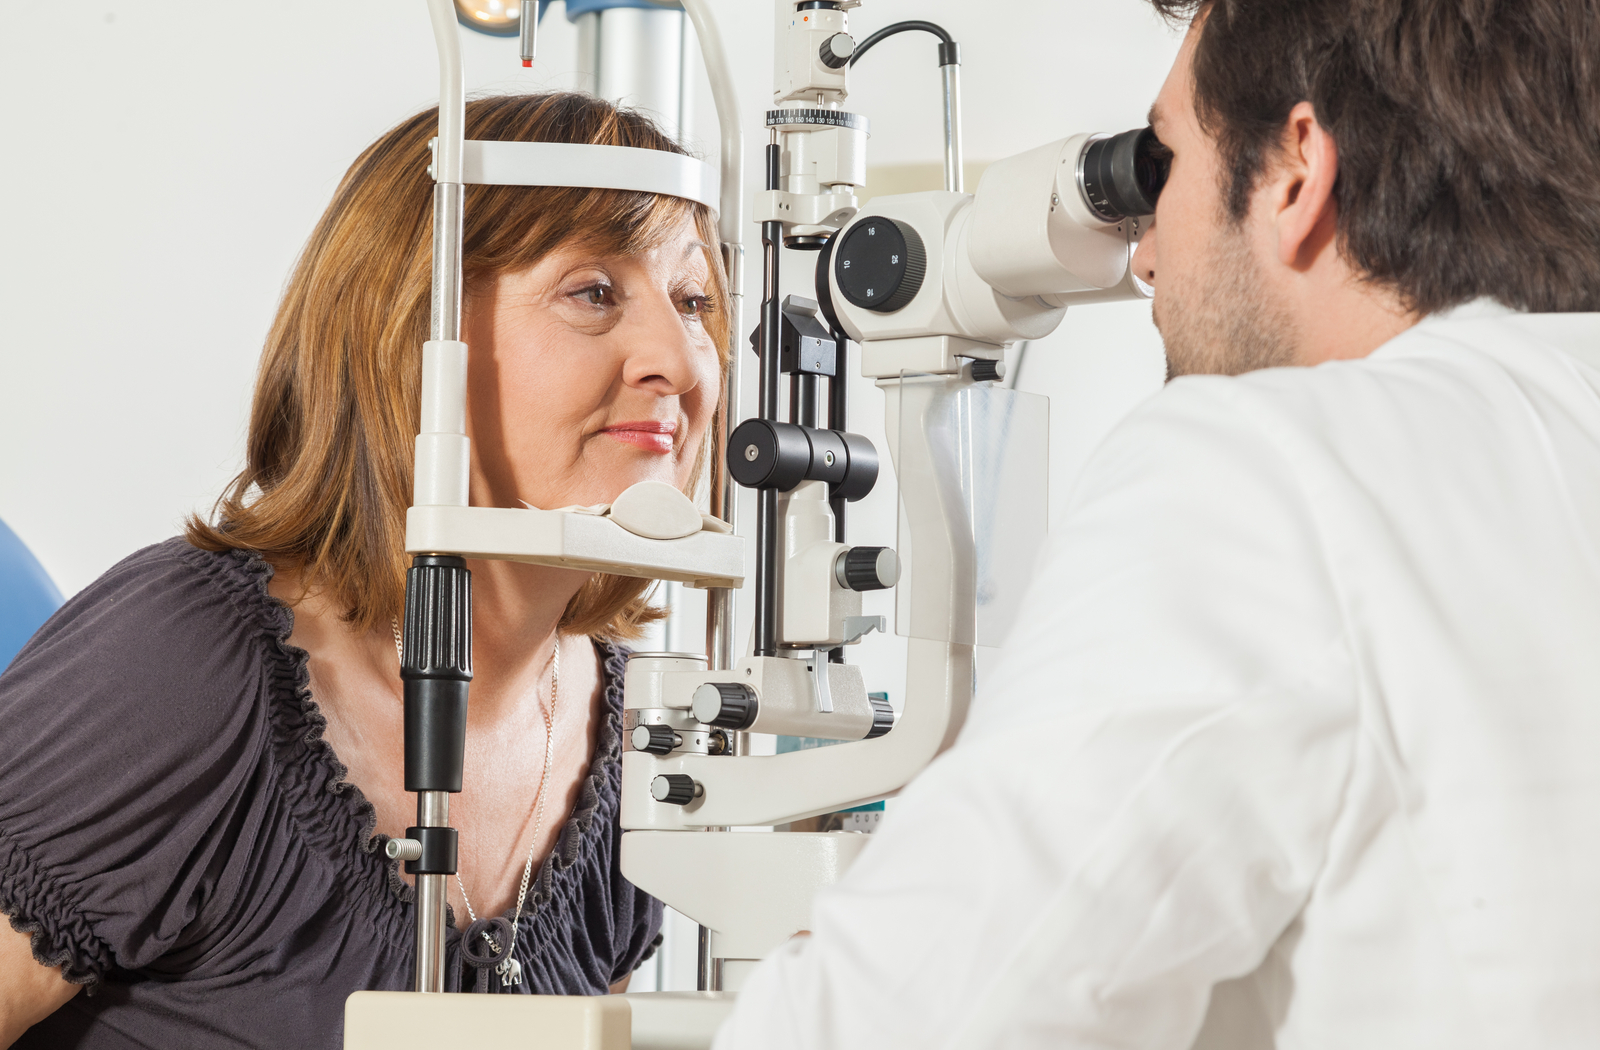 Female optometrist looks at a young female patient's eyes during an examintion with a slit lamp machine.